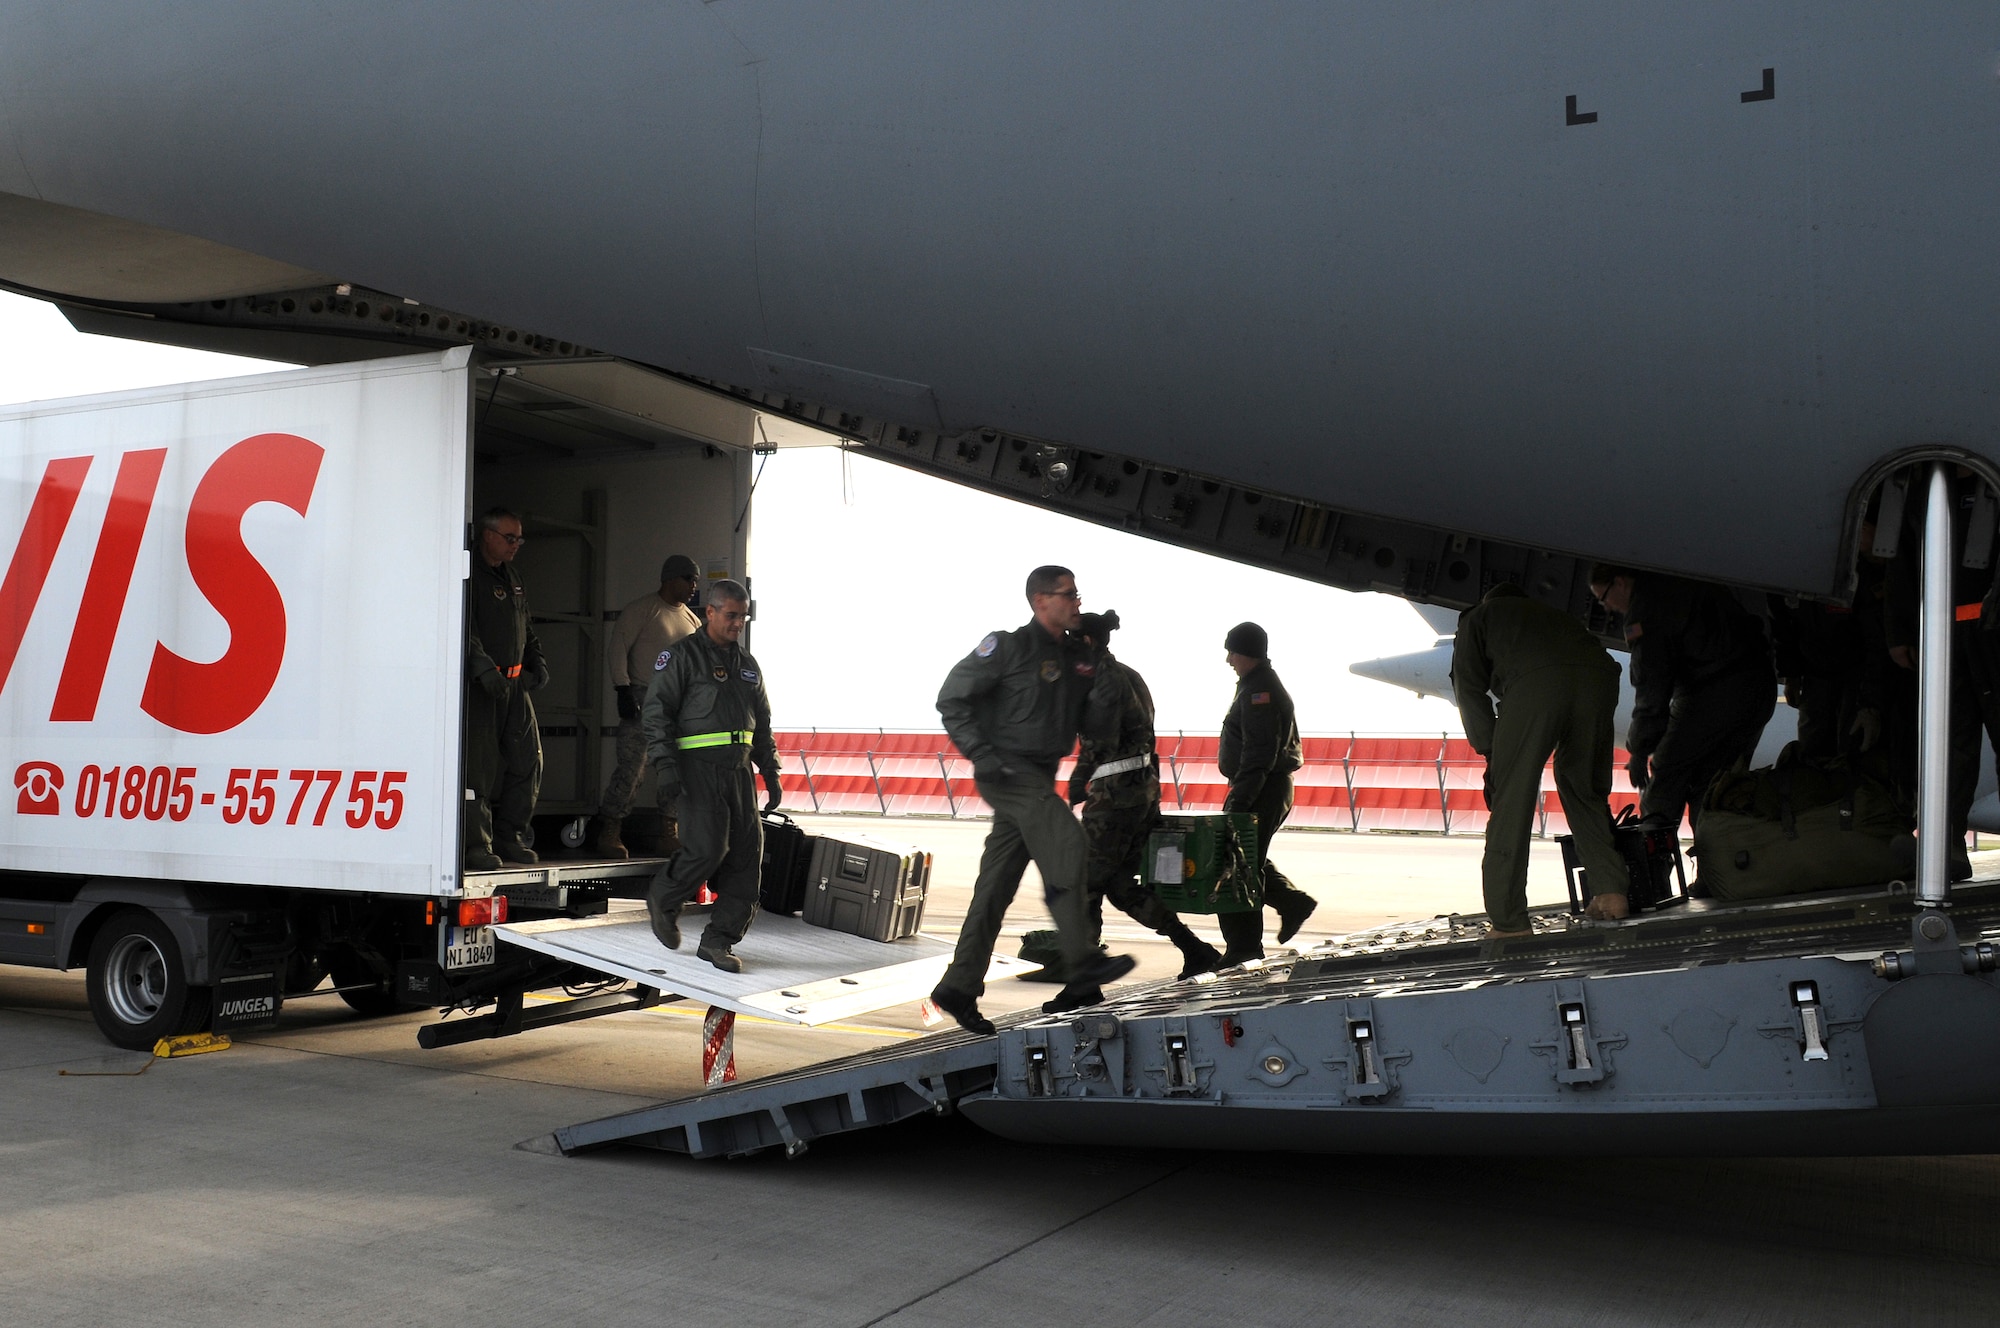 Airmen unload medical supplies from a C-17 Globemaster III, Ramstein Air Base, Germany, Nov. 27, 2008. The C-17 arrived from Andrew Air Force Base, Maryland. (U.S. Air Force photo by Airman 1st Class Grovert Fuentes-Contreras)